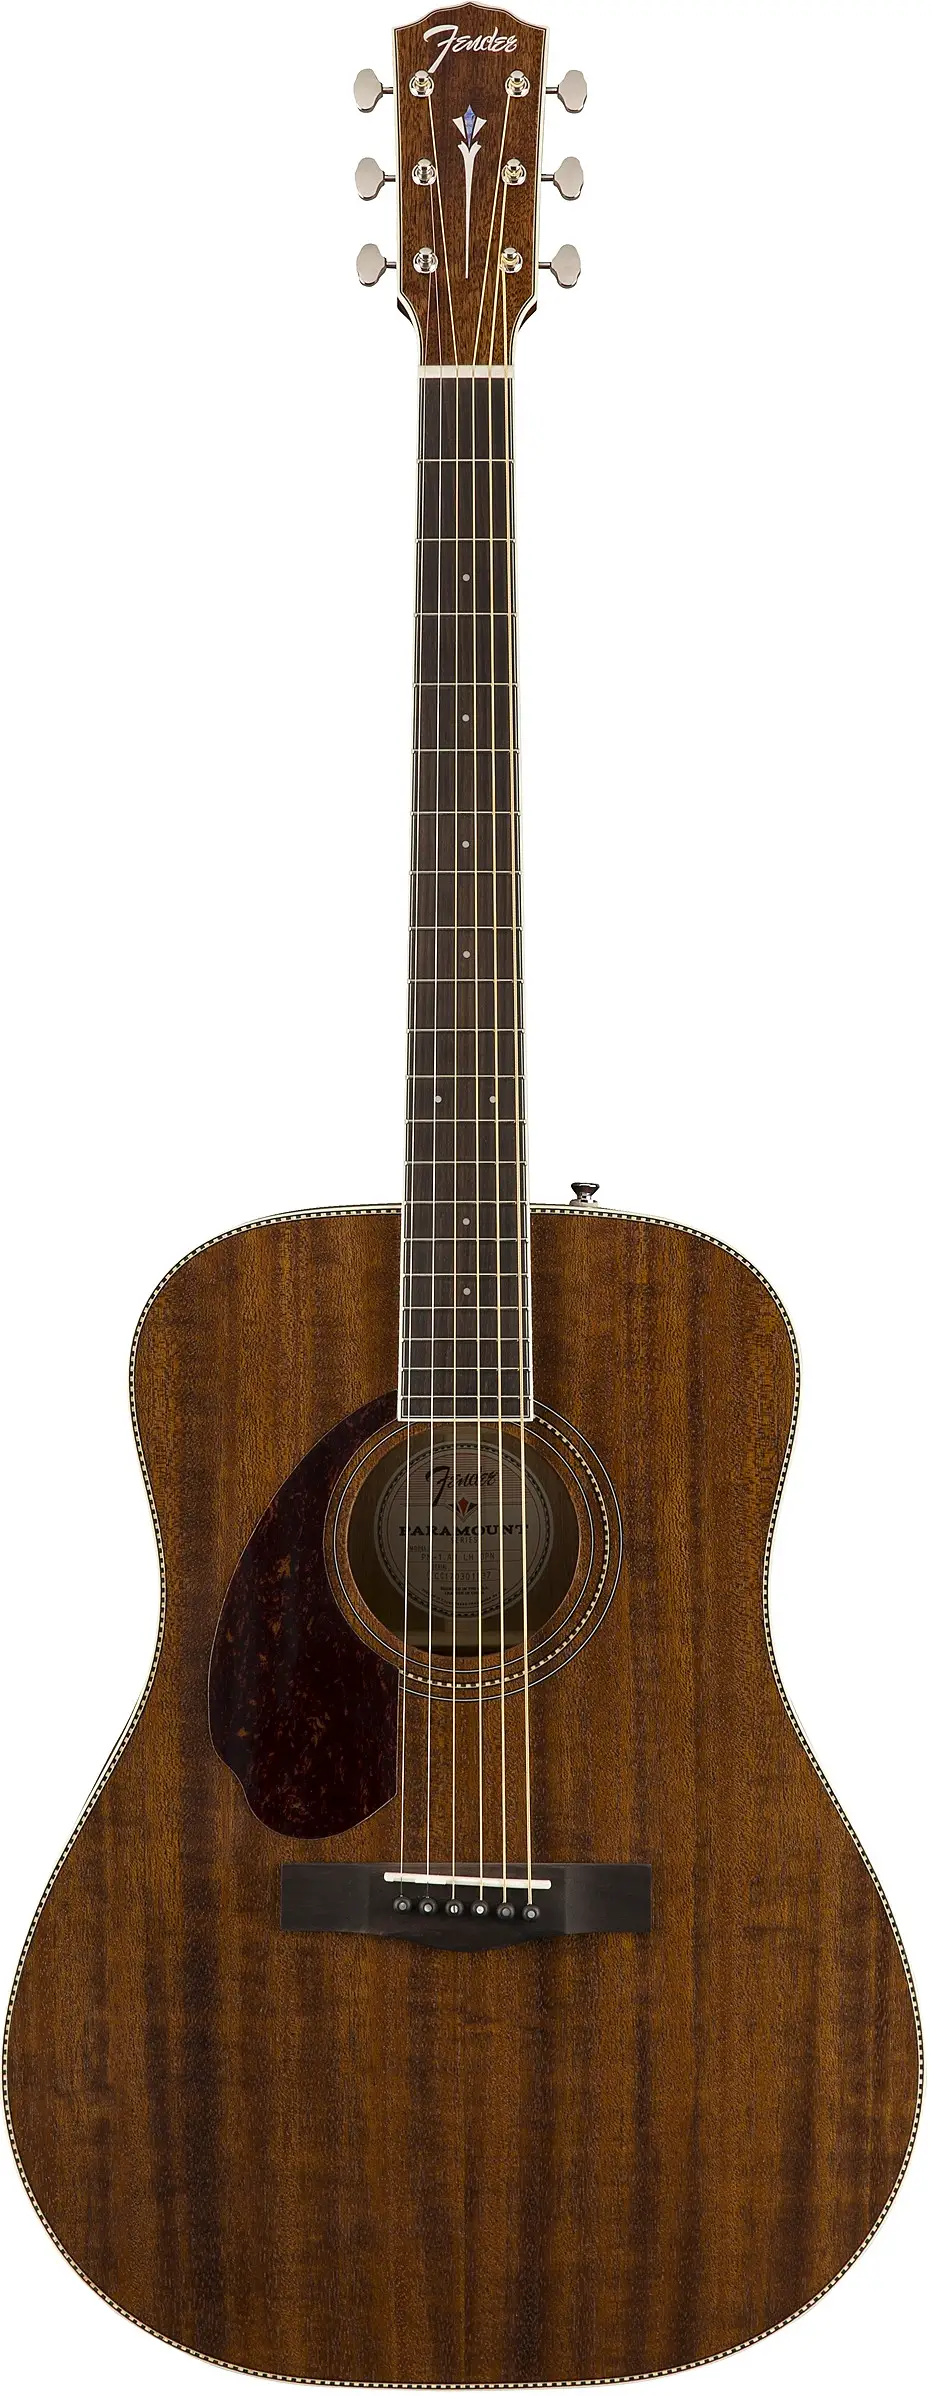 PM-1 Dreadnought All Mahogany LH by Fender